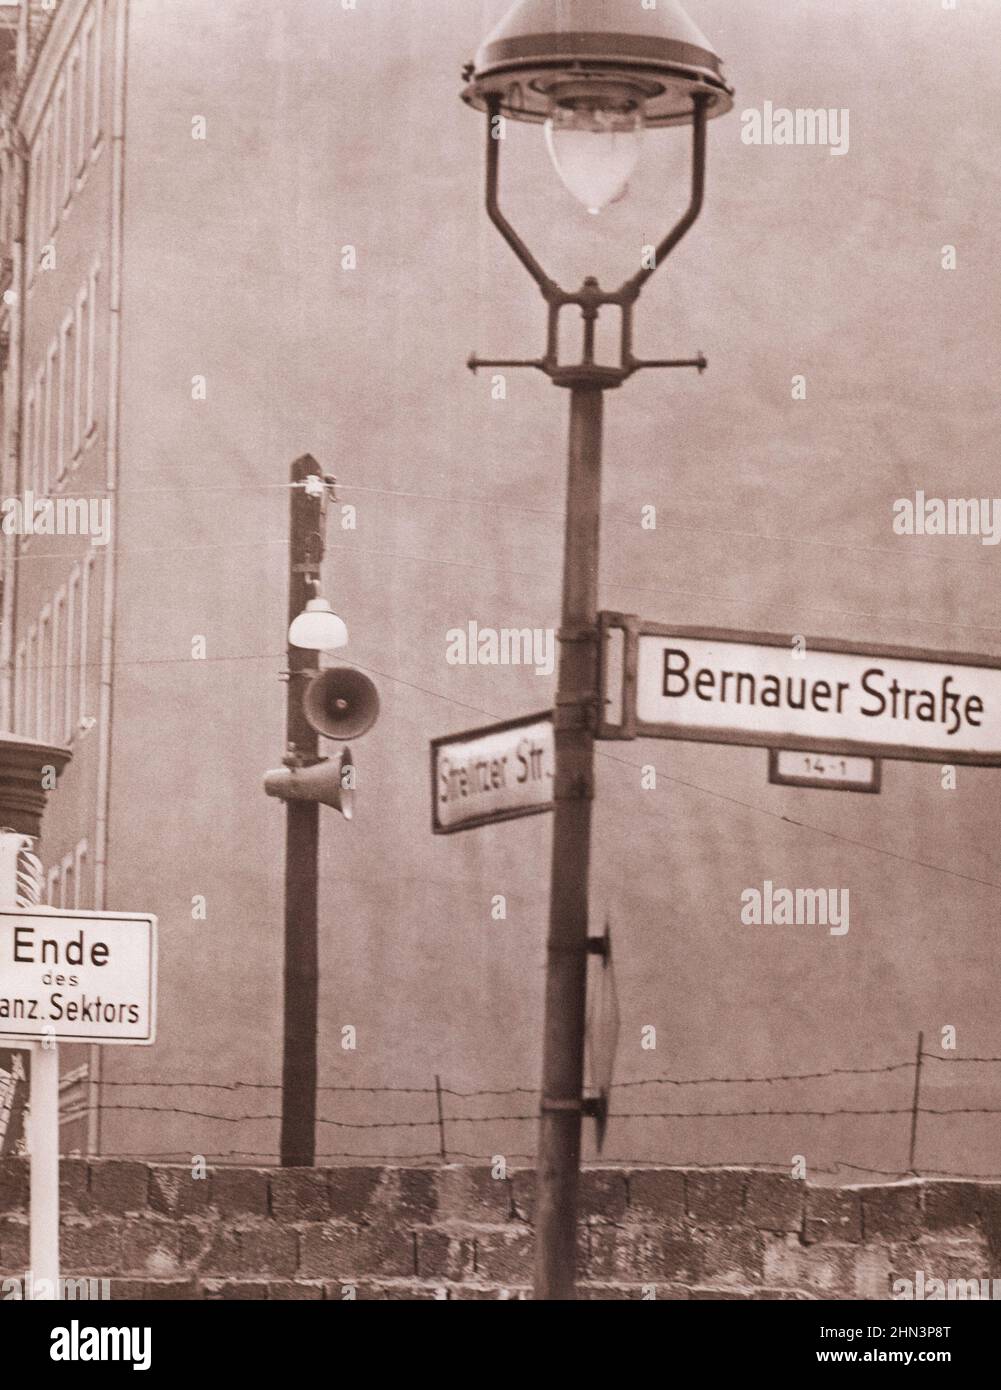 Berlin Crisis of 1961: Building the Wall At Bernauerstrasse large loudspeaker have been installed to proclaim East German propaganda. East Belin - Wes Stock Photo